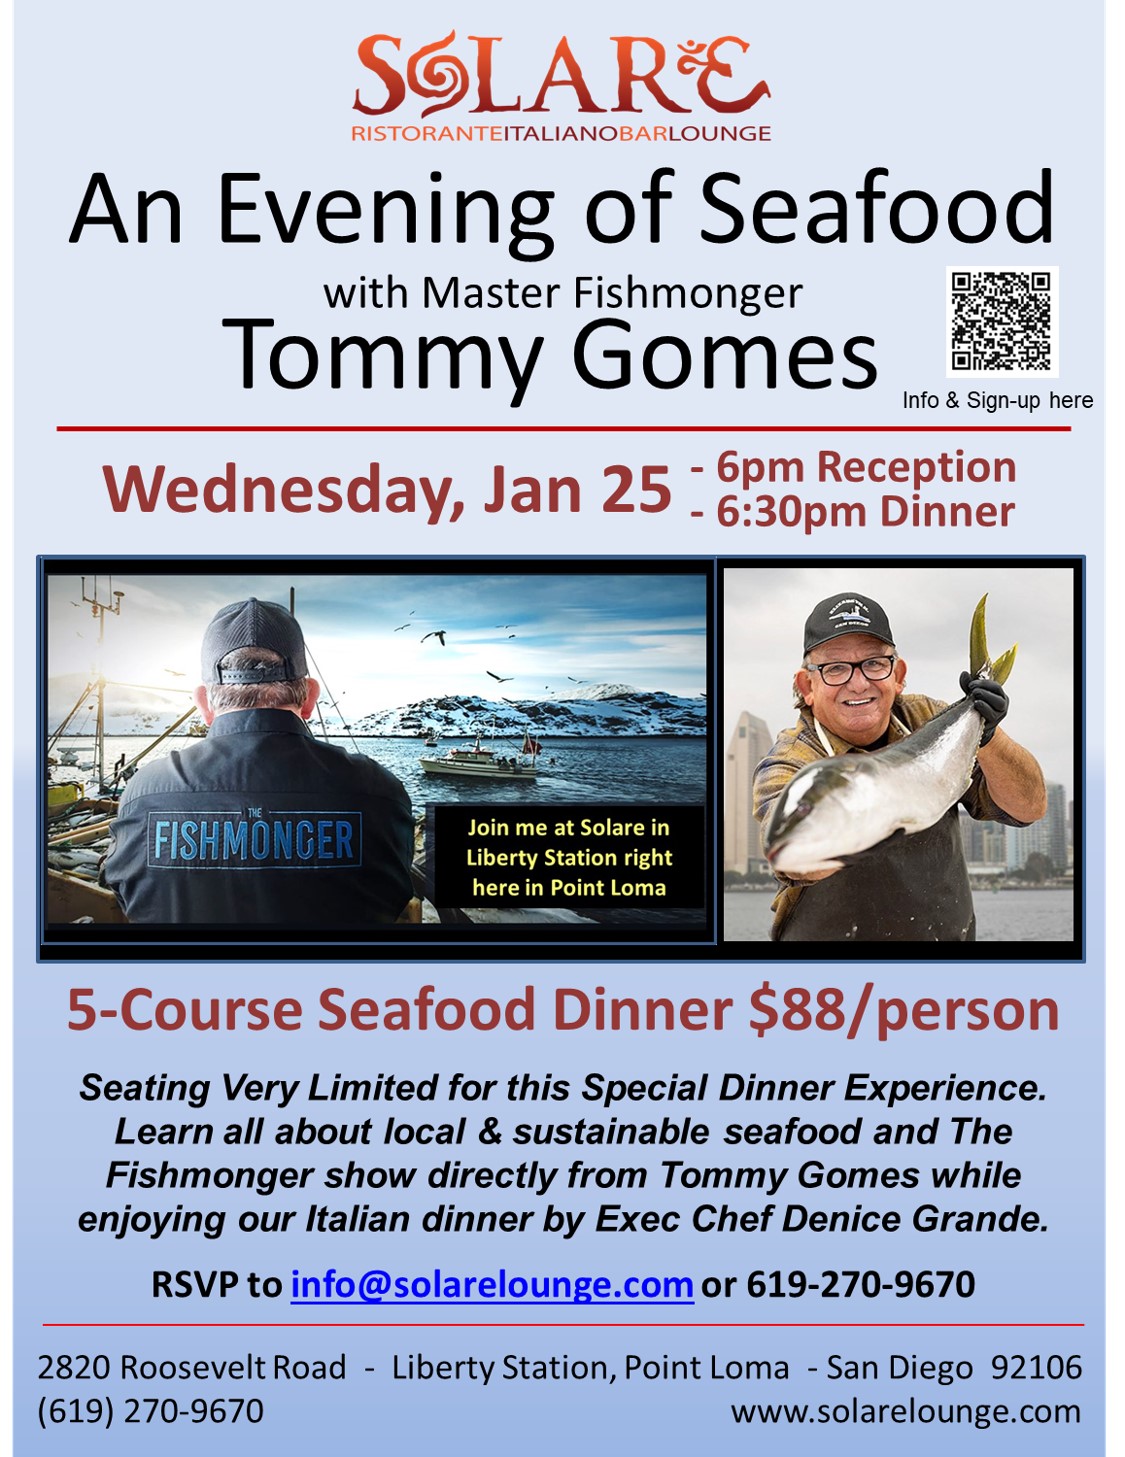 <a id="Solare-Tommy-Gomes-2023-Dinner-encore"></a>Tommy Gomes extra special Evening of Seafood Dinner!